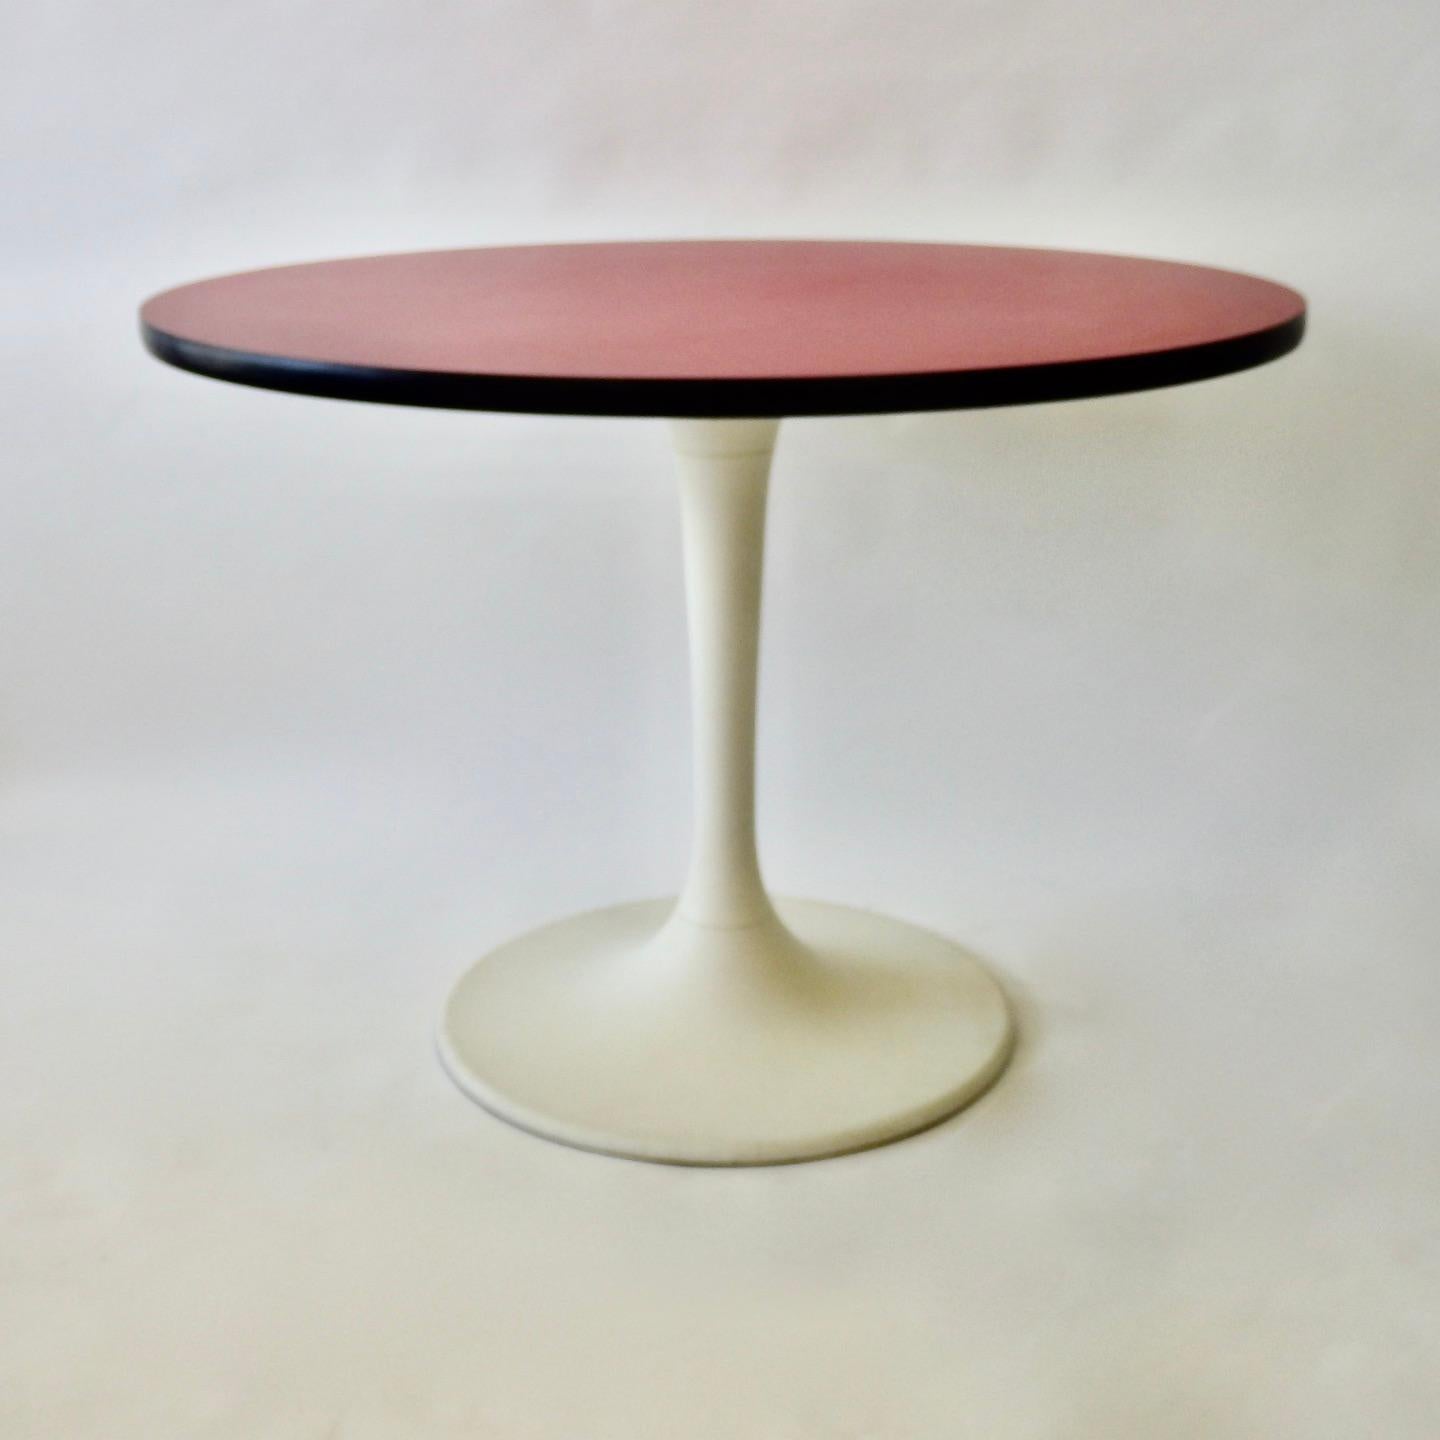 Followinf suite to Eero Saarinens tulip tables for Knoll. Maurice Burke designed a number of variations on that theme. This one has a red top with milky white base.